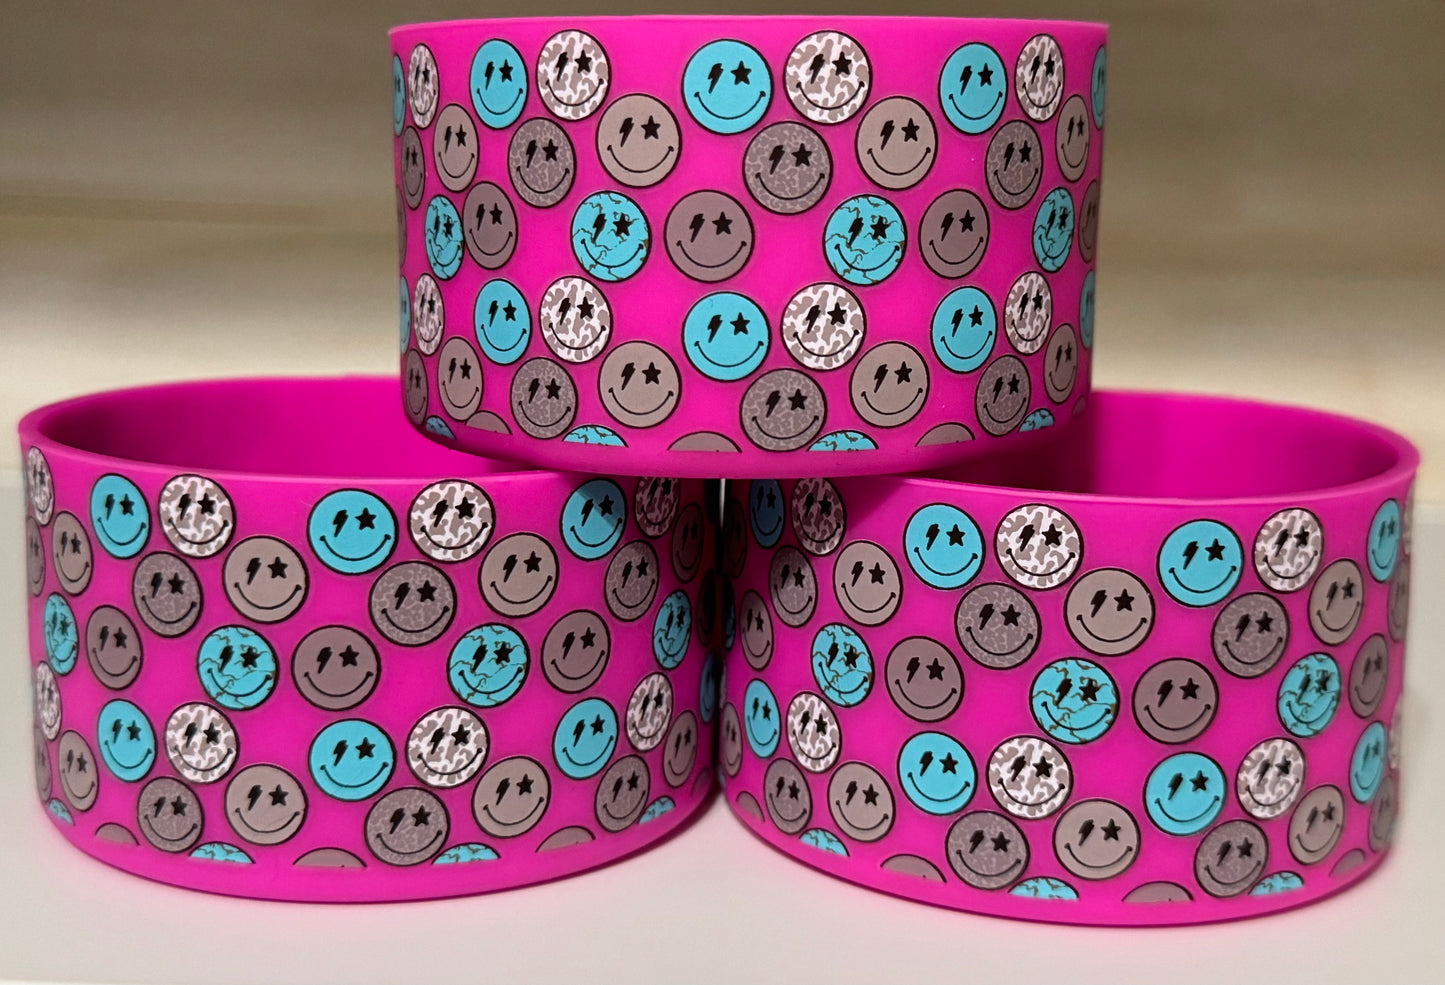 Pink Smiley 2.0 Silicone Tumbler Boot